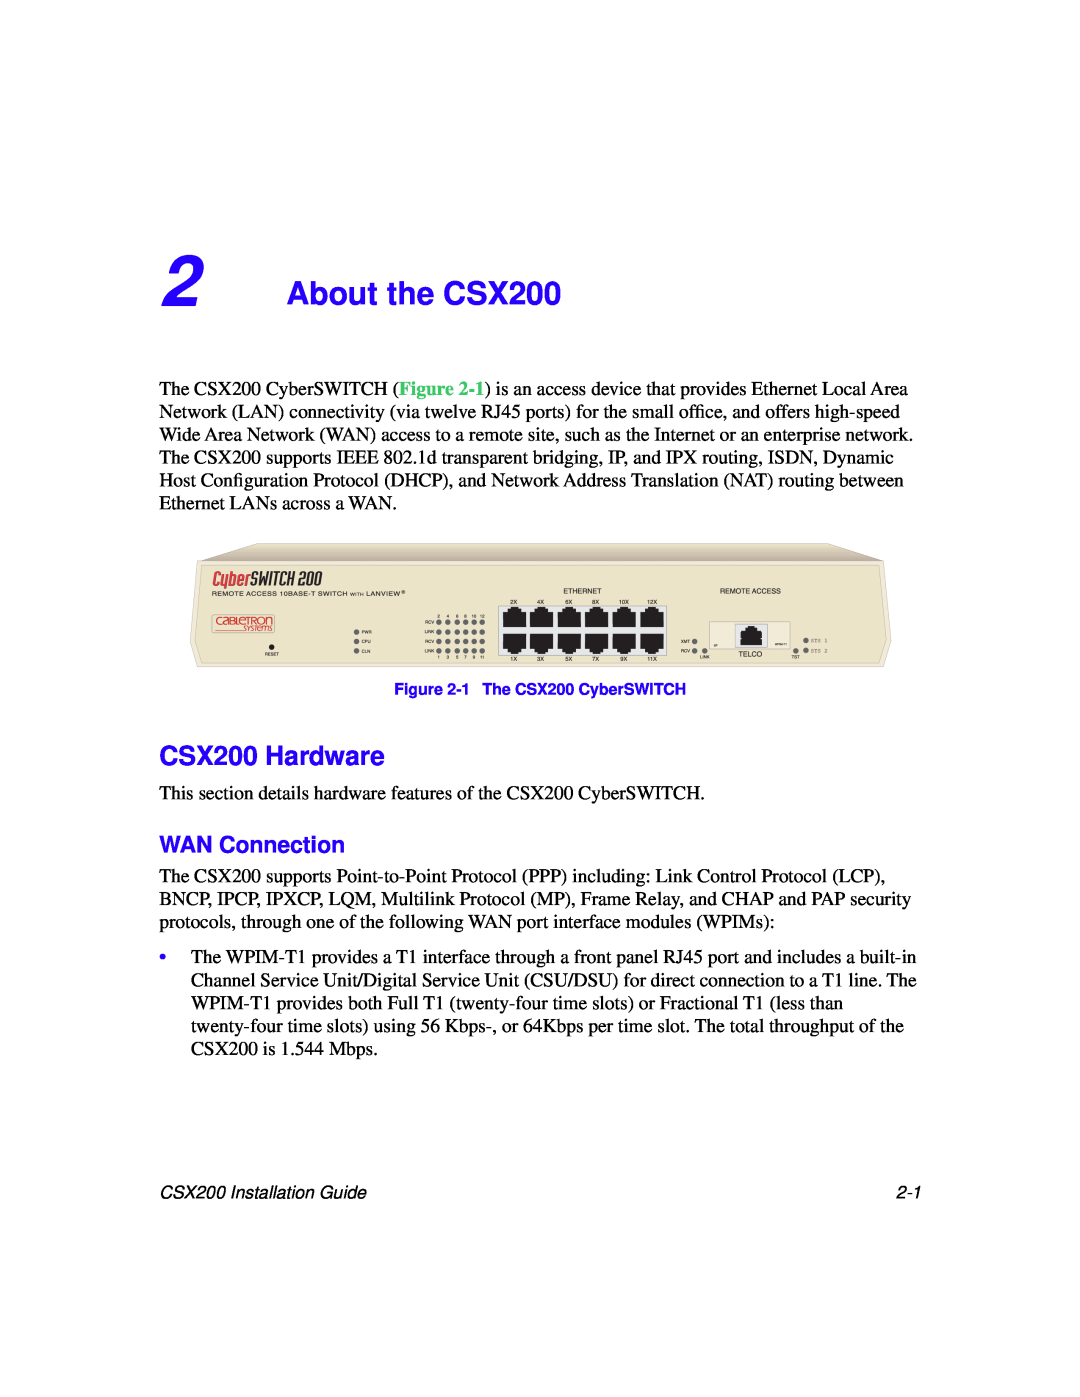 Cabletron Systems manual About the CSX200, CSX200 Hardware, WAN Connection 